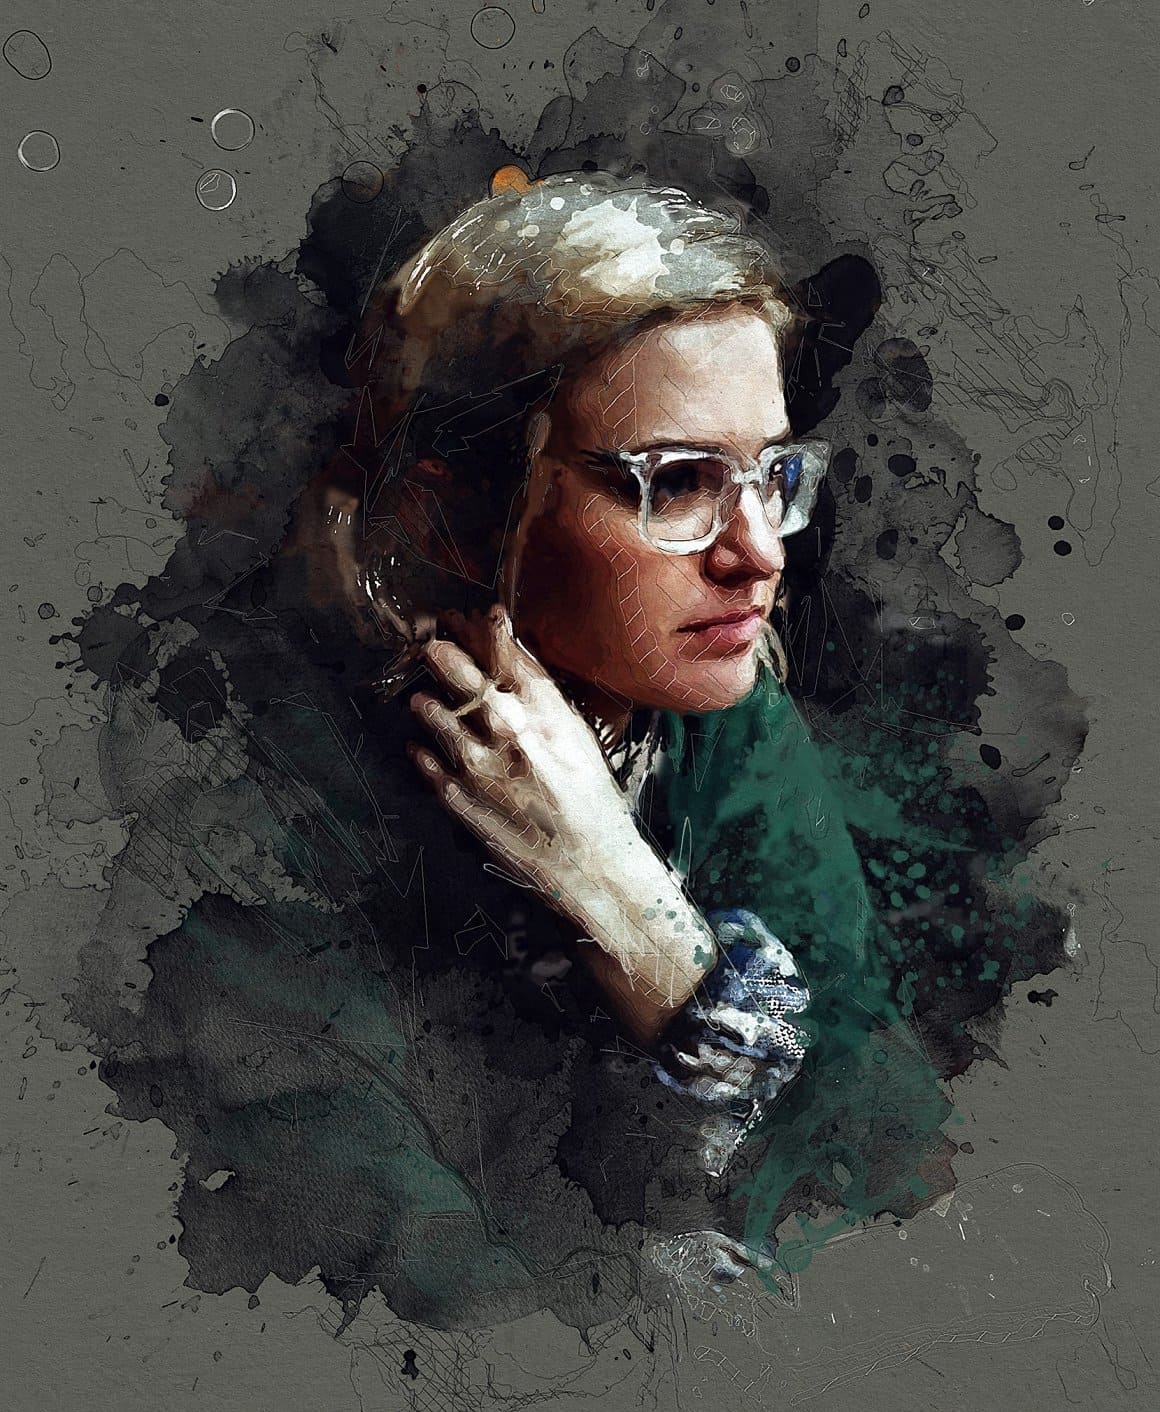 The image of a girl in a green jacket, with glasses on her eyes is painted with watercolors in Photoshop.